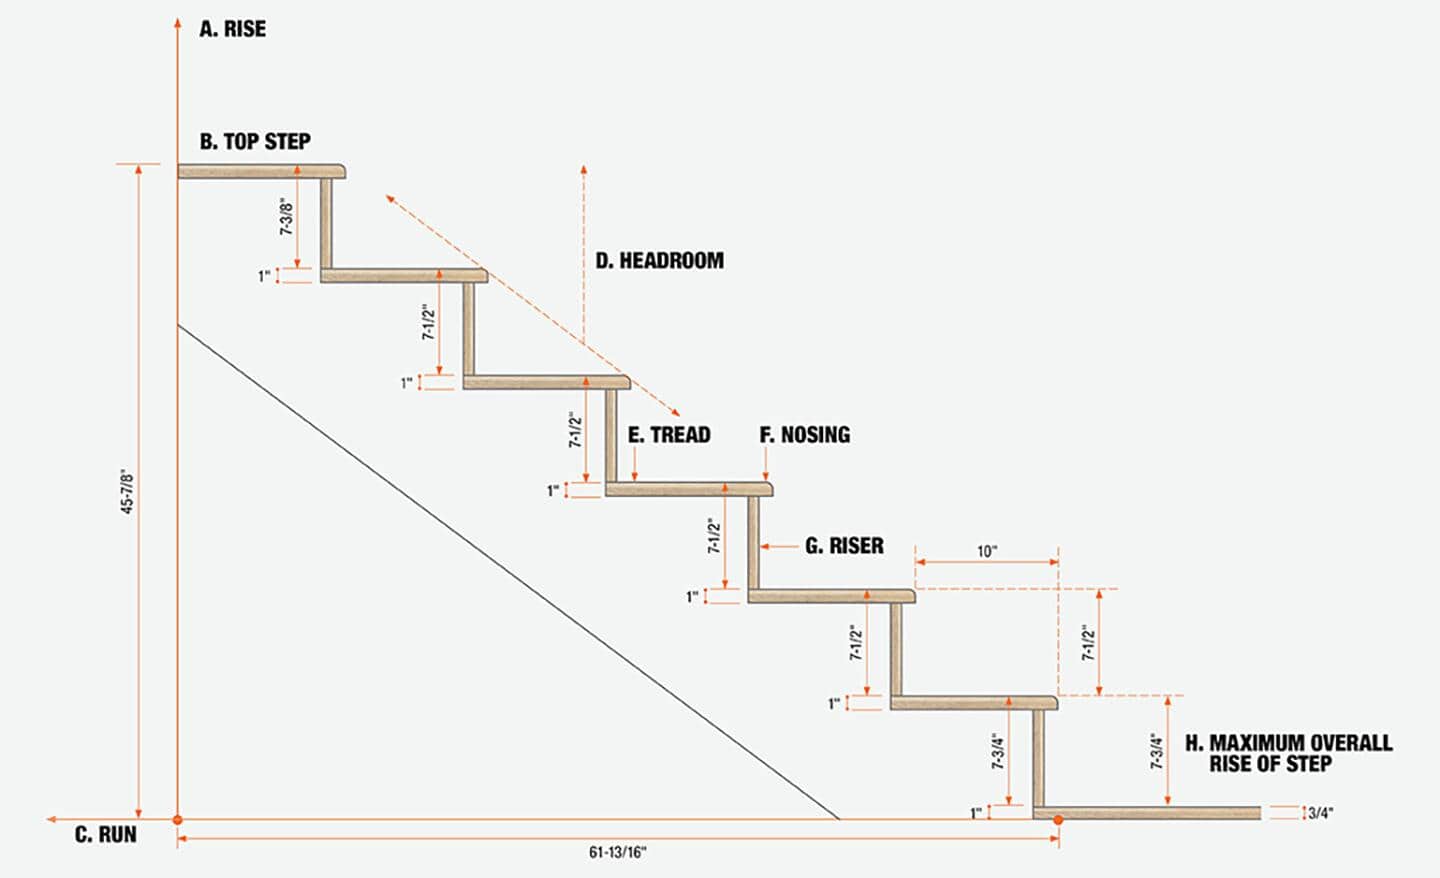 A graphic showing the parts of a staircase with text labels.